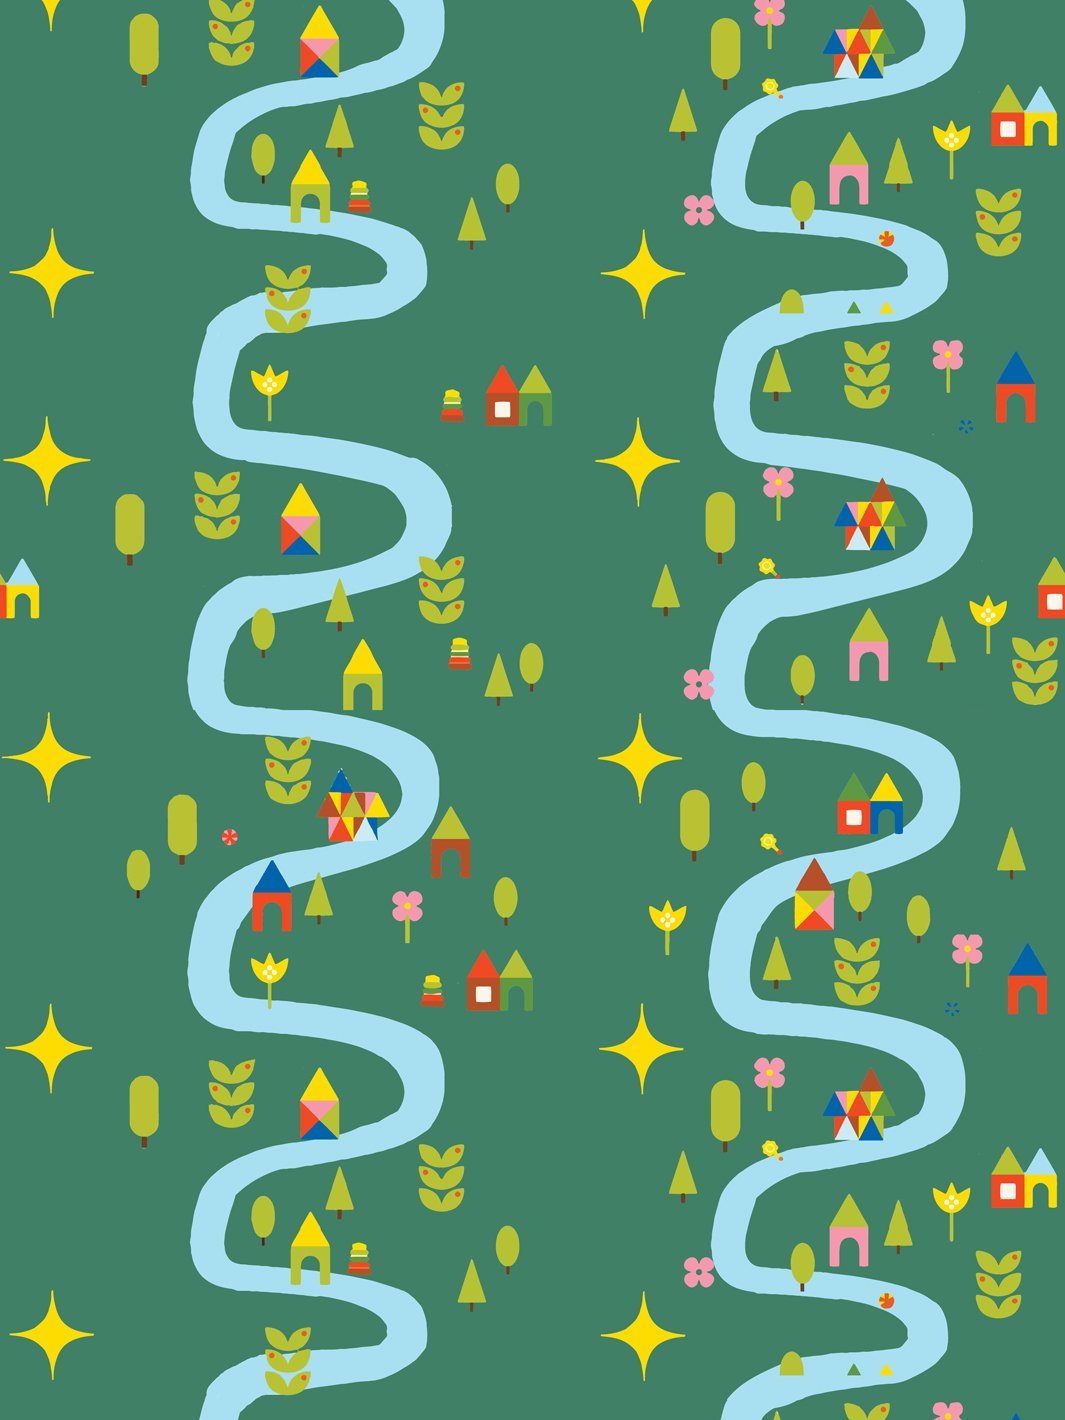 'Rivers & Roads' Wallpaper by Fisher-Price™ - Green